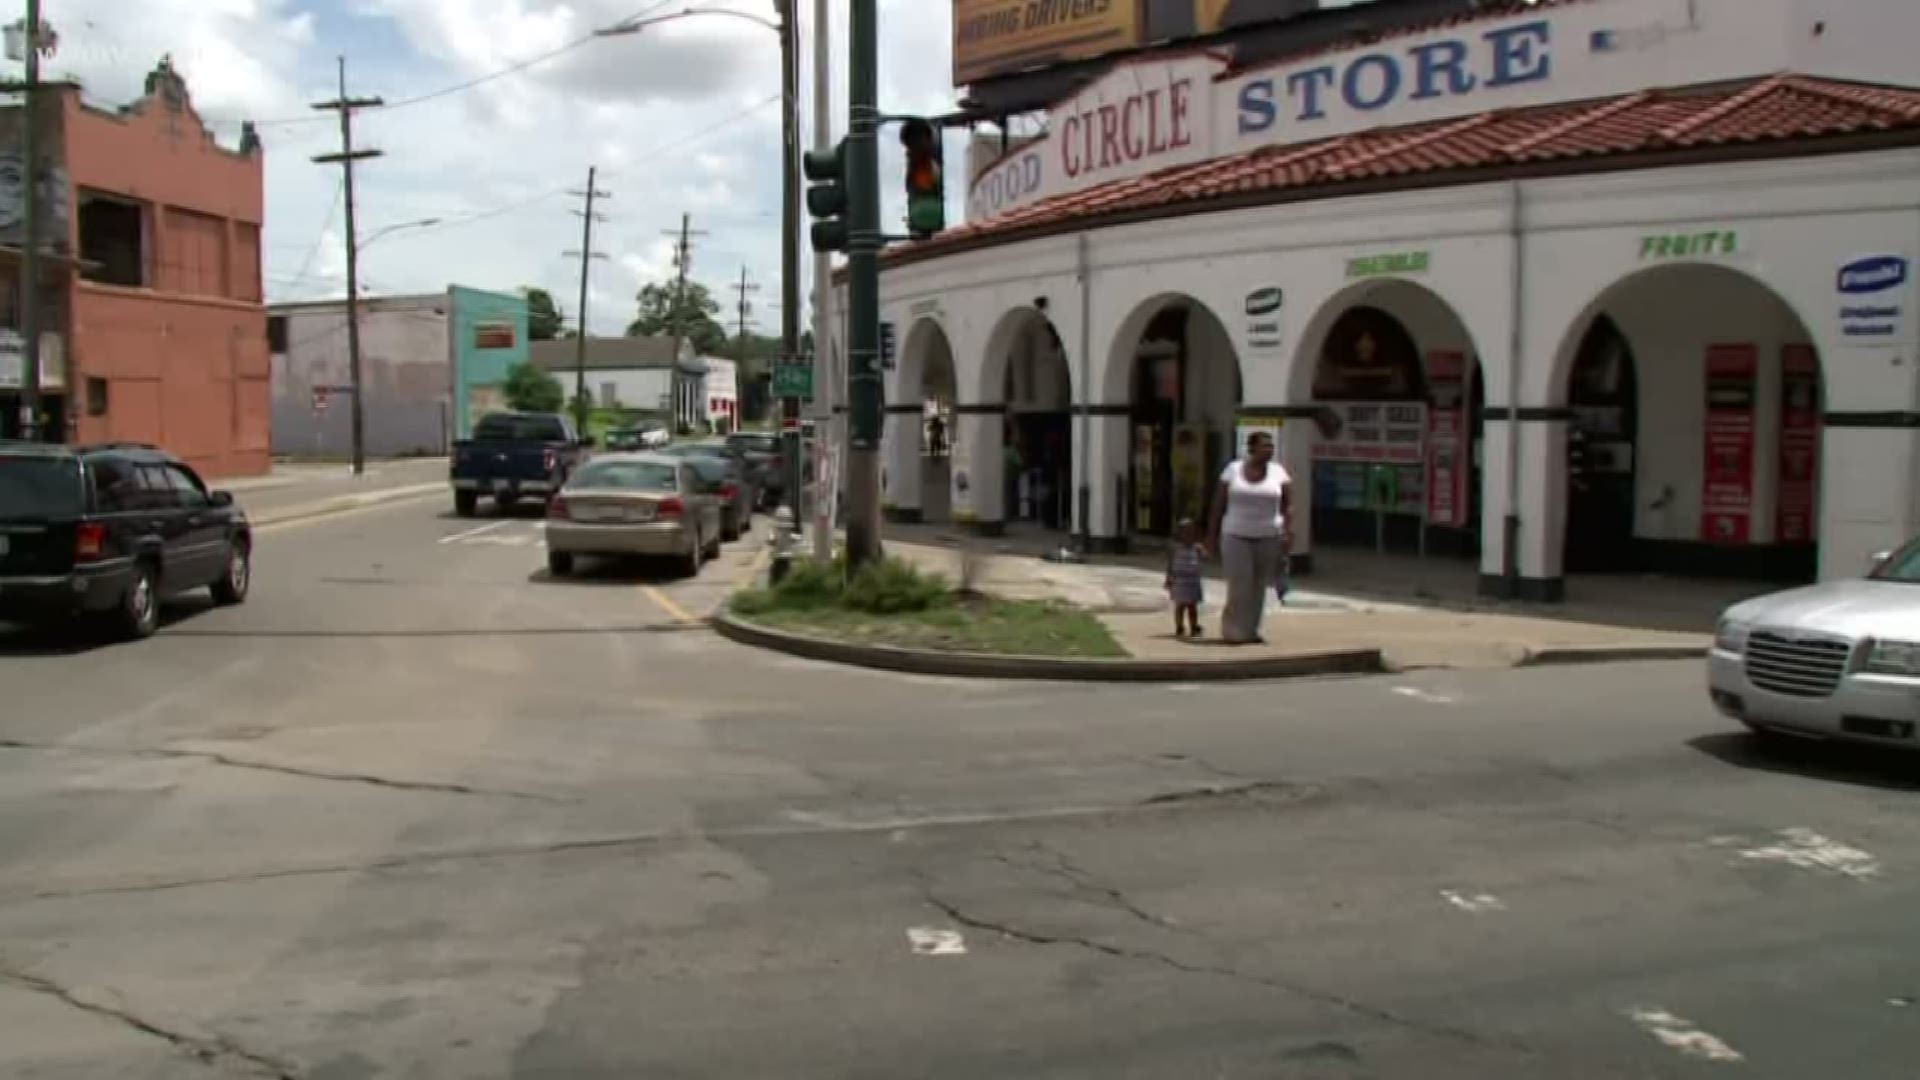 The troubled Circle Foods Store - an iconic building in New Orleans - was purchased by local businessman Sidney Torres. The question is what will he do with it?